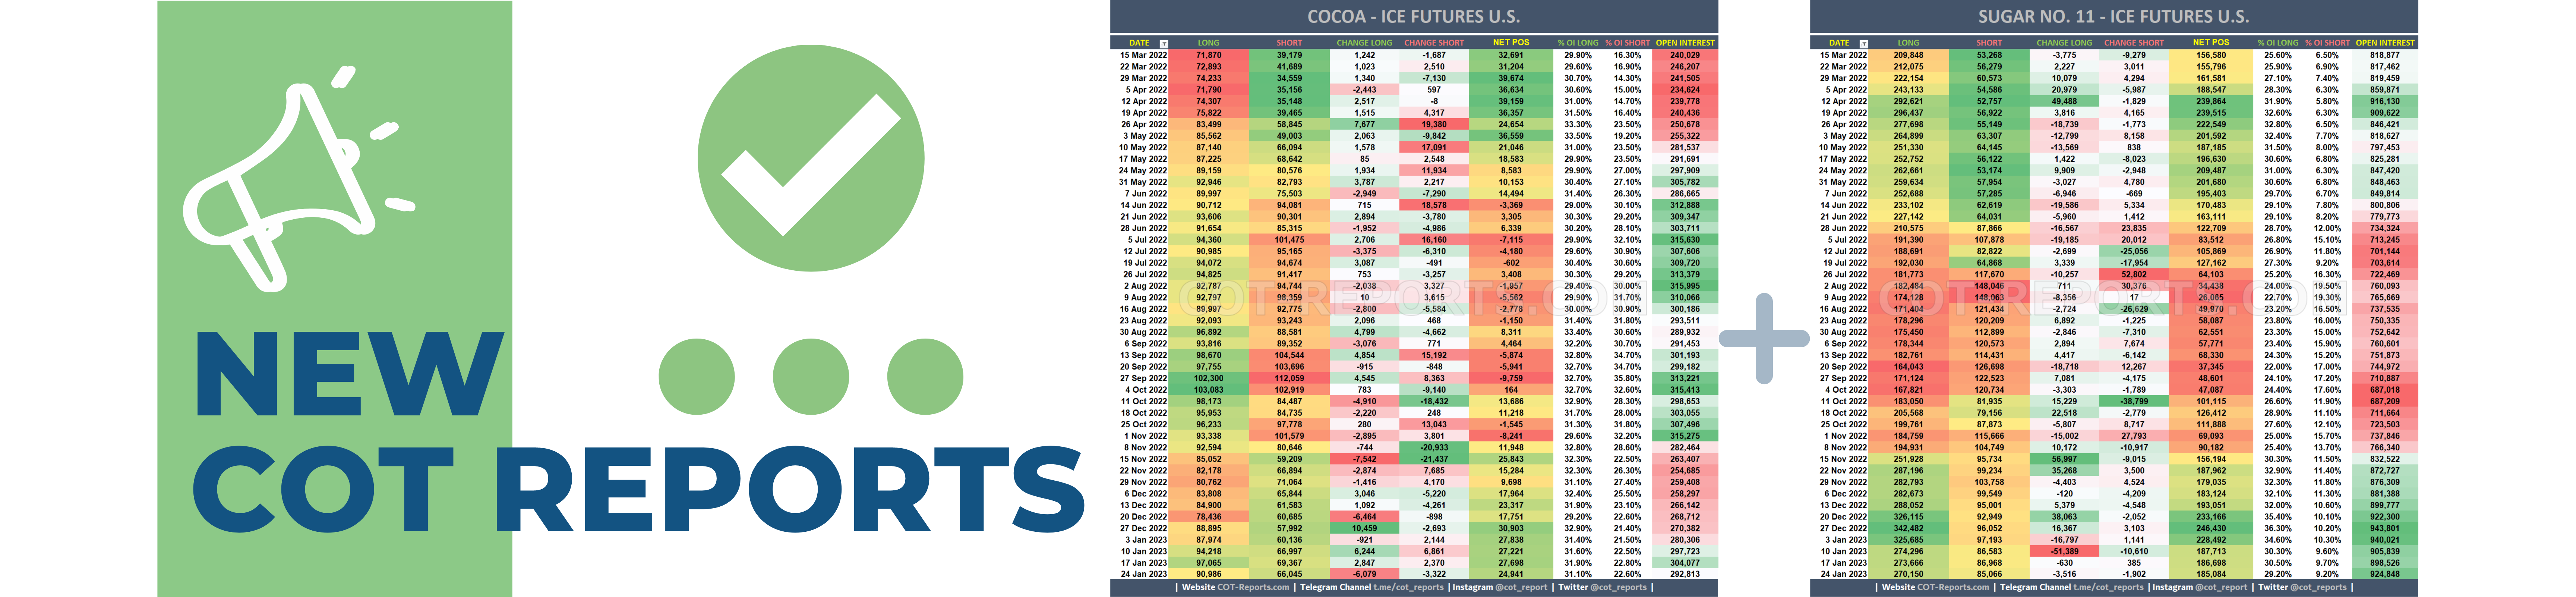 New COT Reports in Metals, Commodities & Indexes